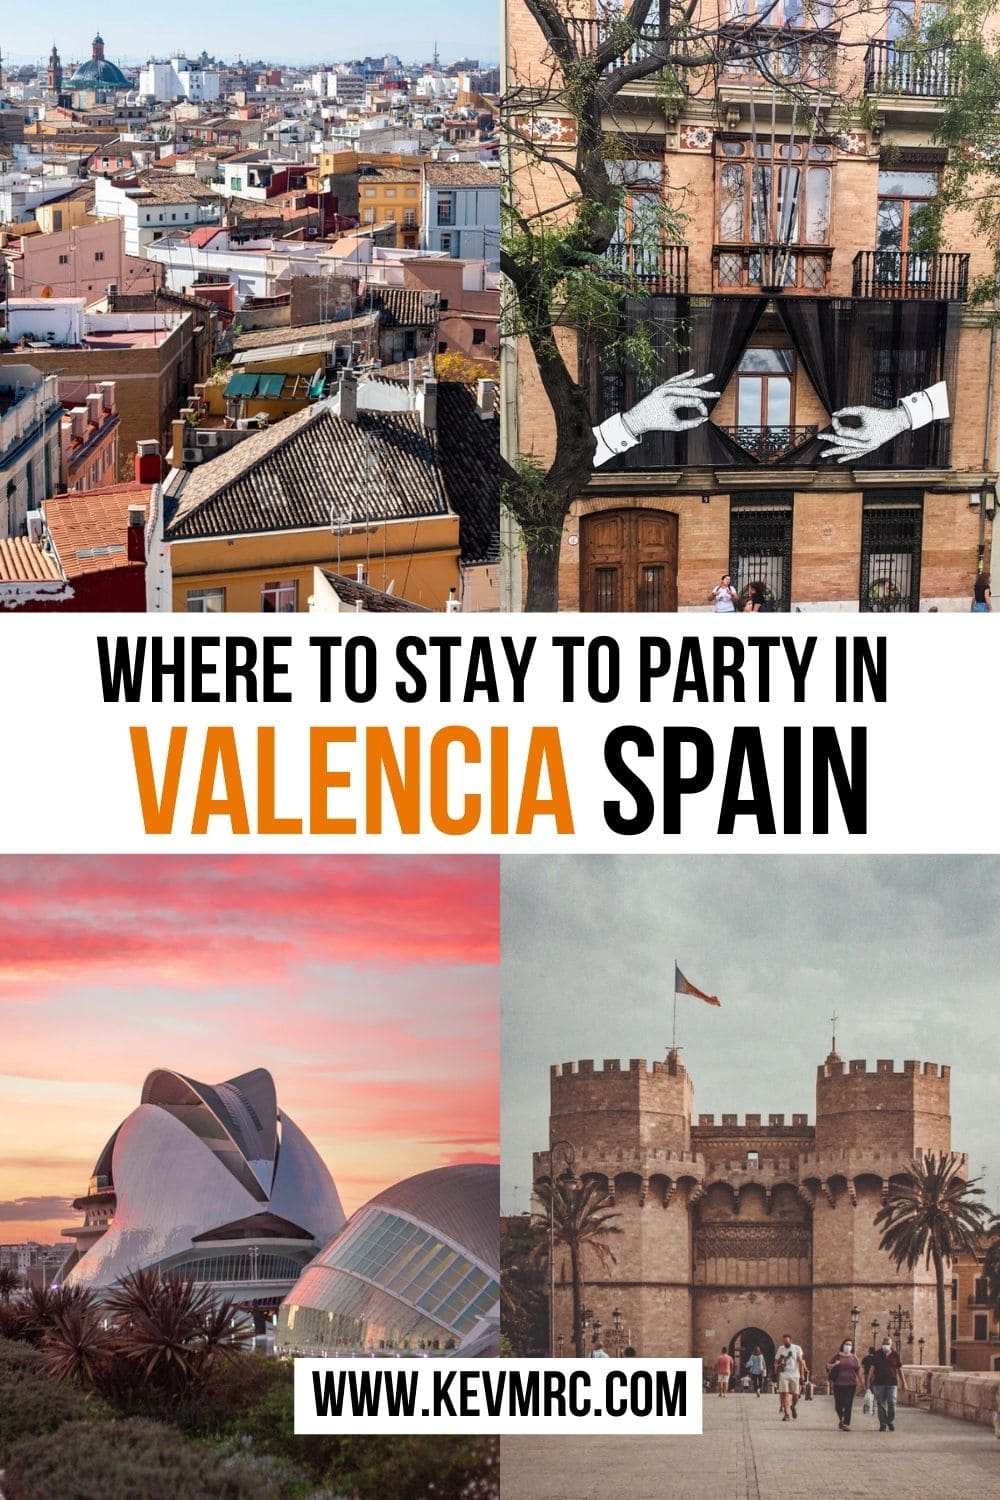 Find the best district where to stay in Valencia to party. Valencia is a major destination to party. Tapas bars, clubs with views on the beach, traditional paella restaurants, trendy nightclubs or underground clubs: the city is full of party venues and is one of the most festive cities in Spain. Let's find the best area and best hotels to party in Valencia!  living in valencia spain | valencia spain travel